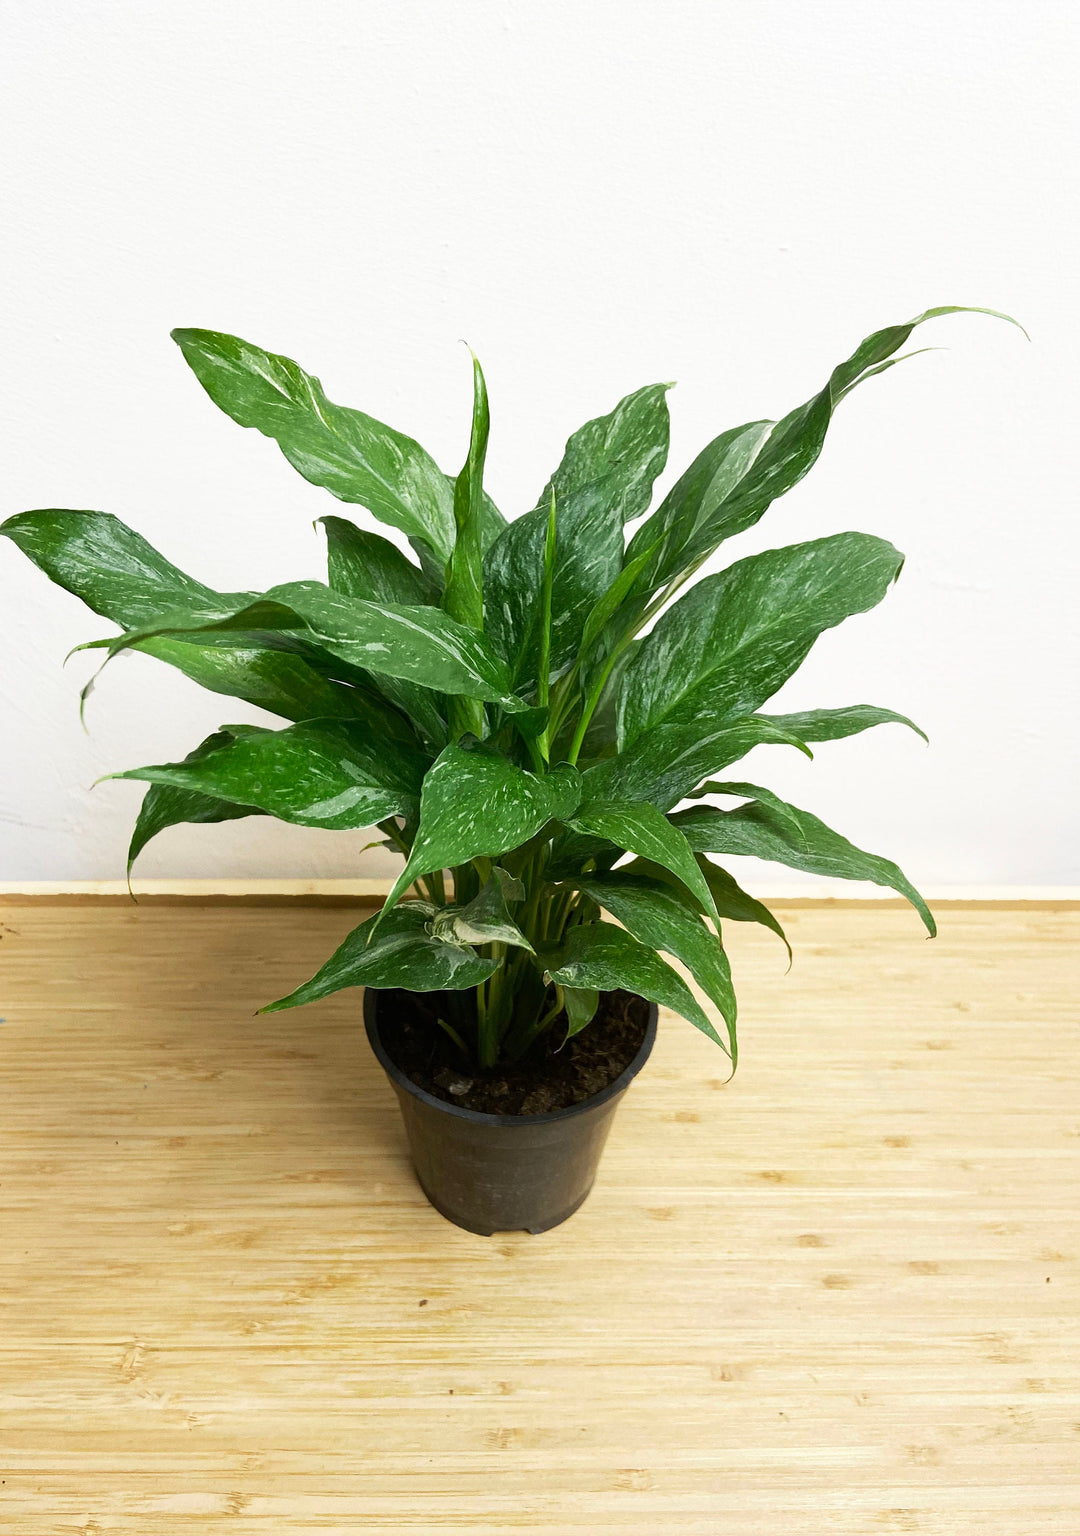 Variegated Peace Lily "Spathiphyllum Domino"